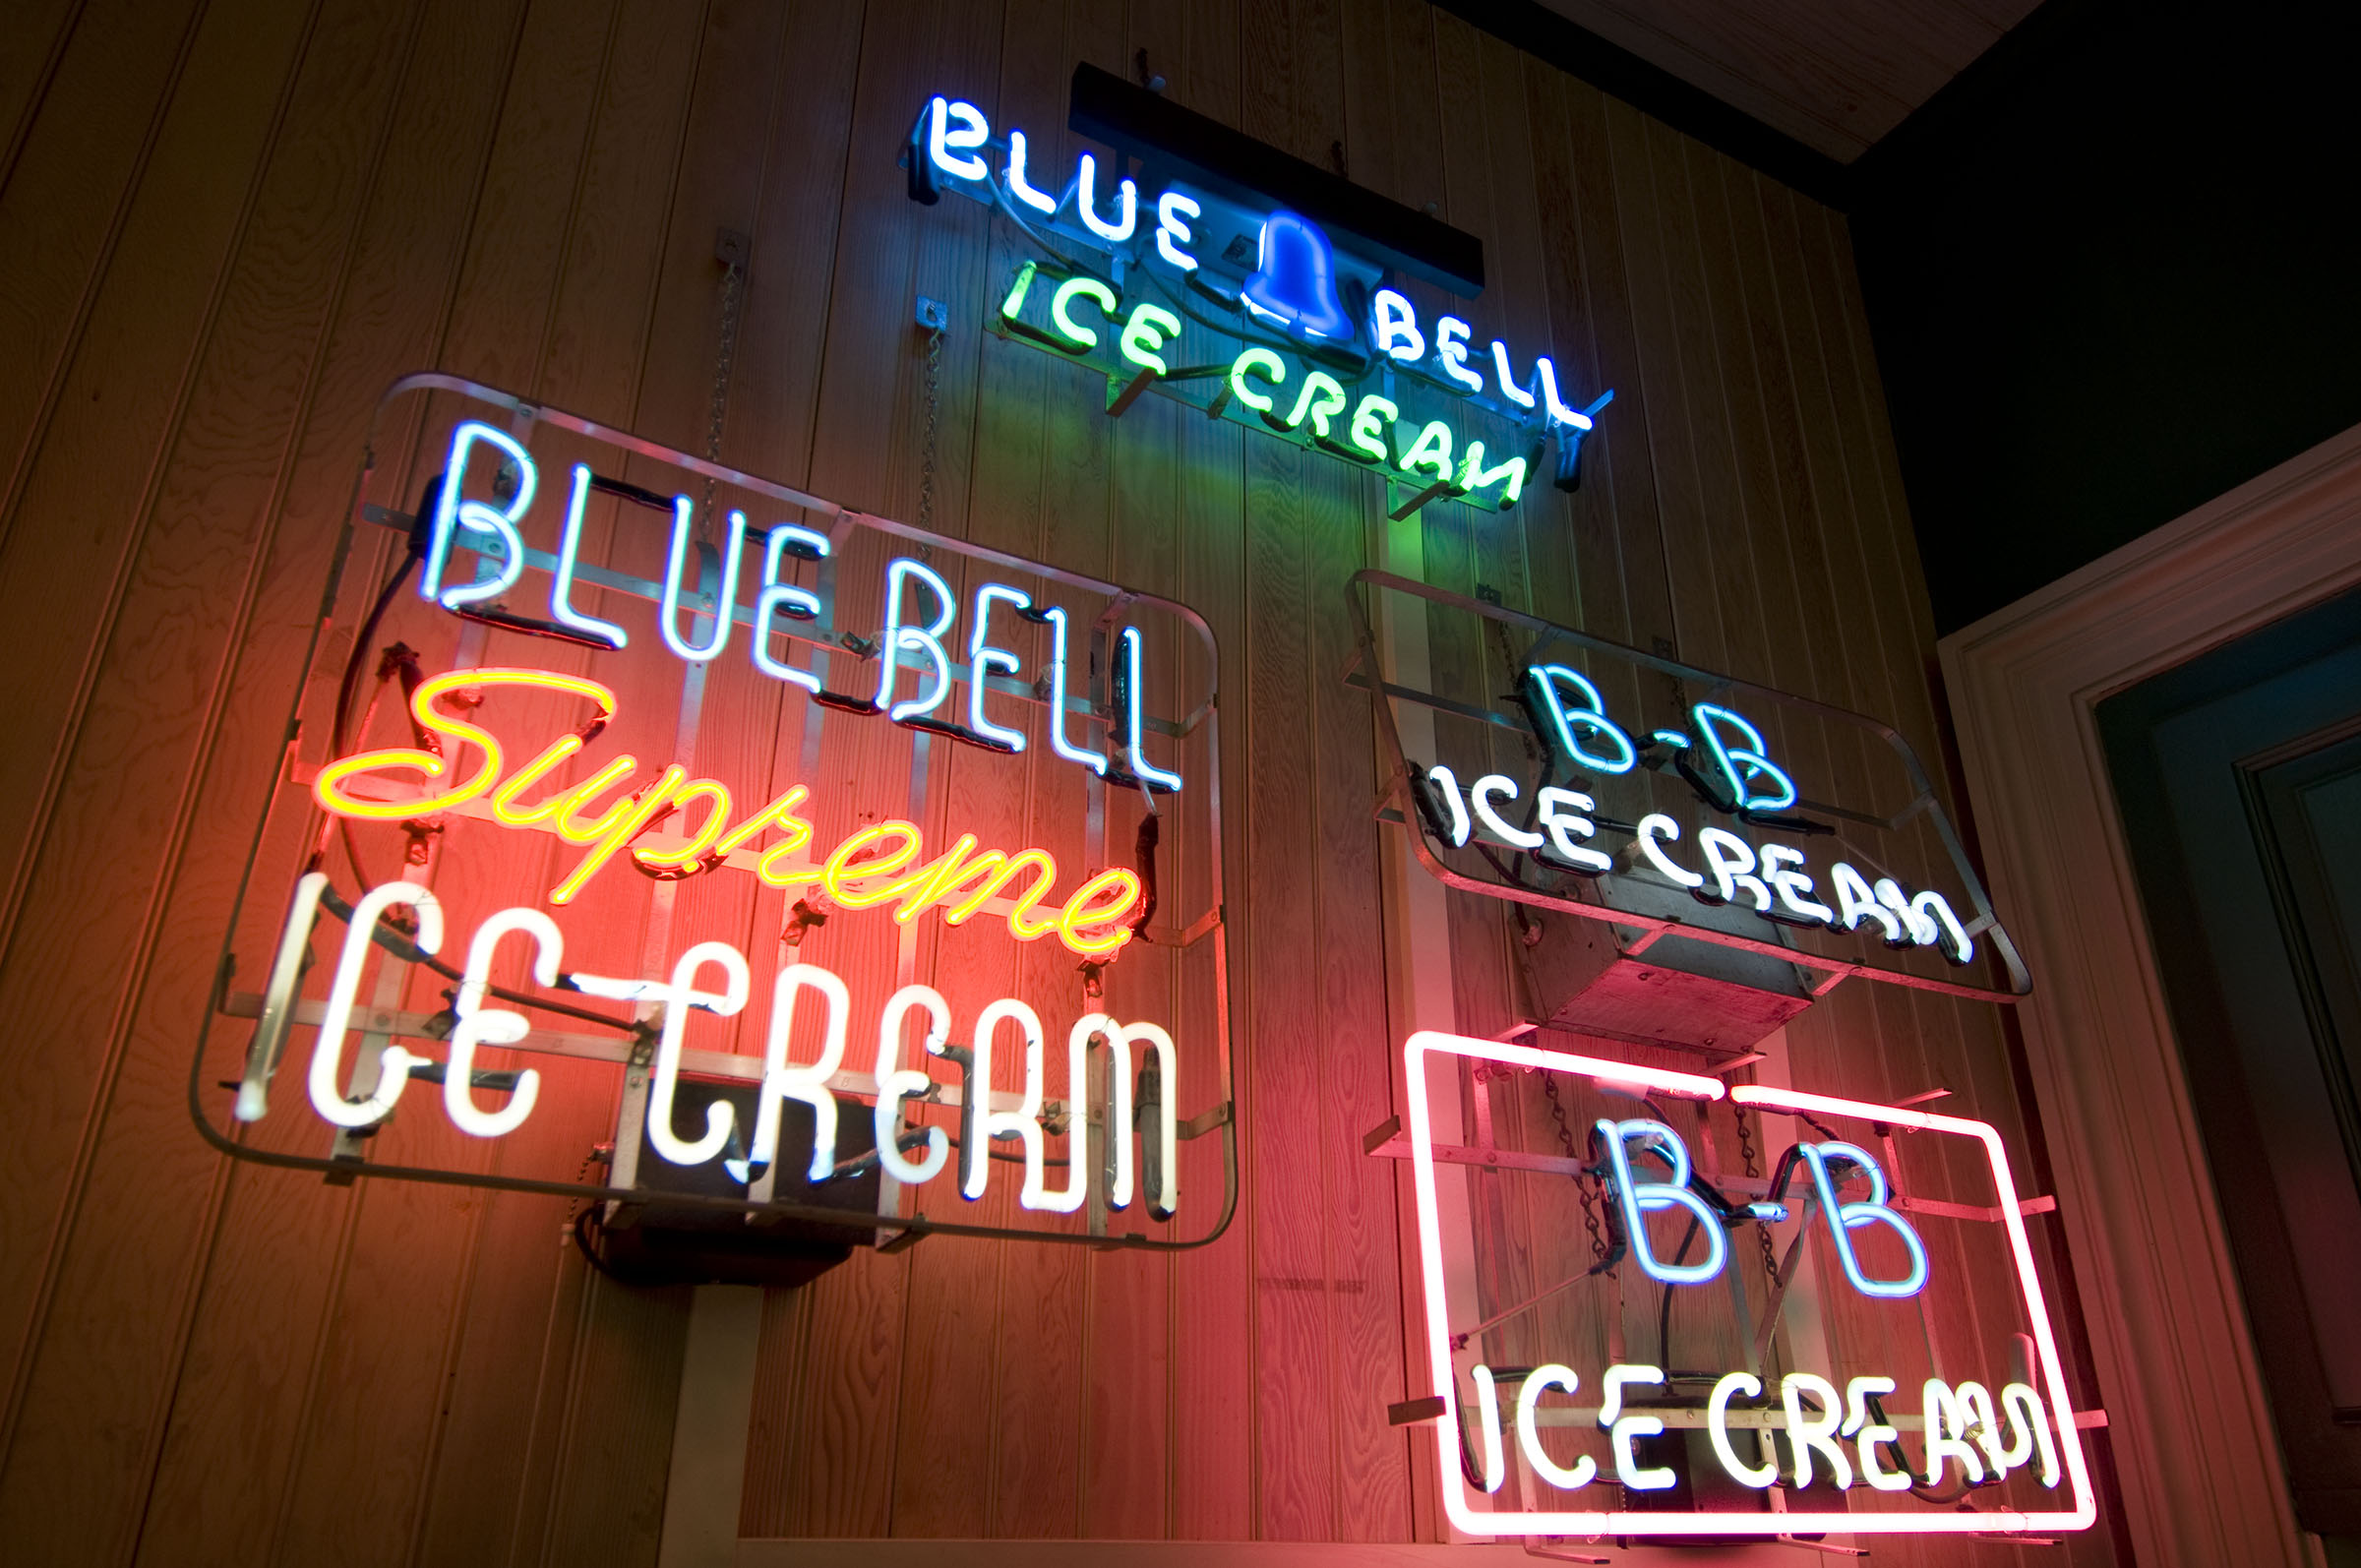 Neon signs reading "Blue Bell Supreme Ice Cream" and "Blue Bell Ice Cream" adorn a wall